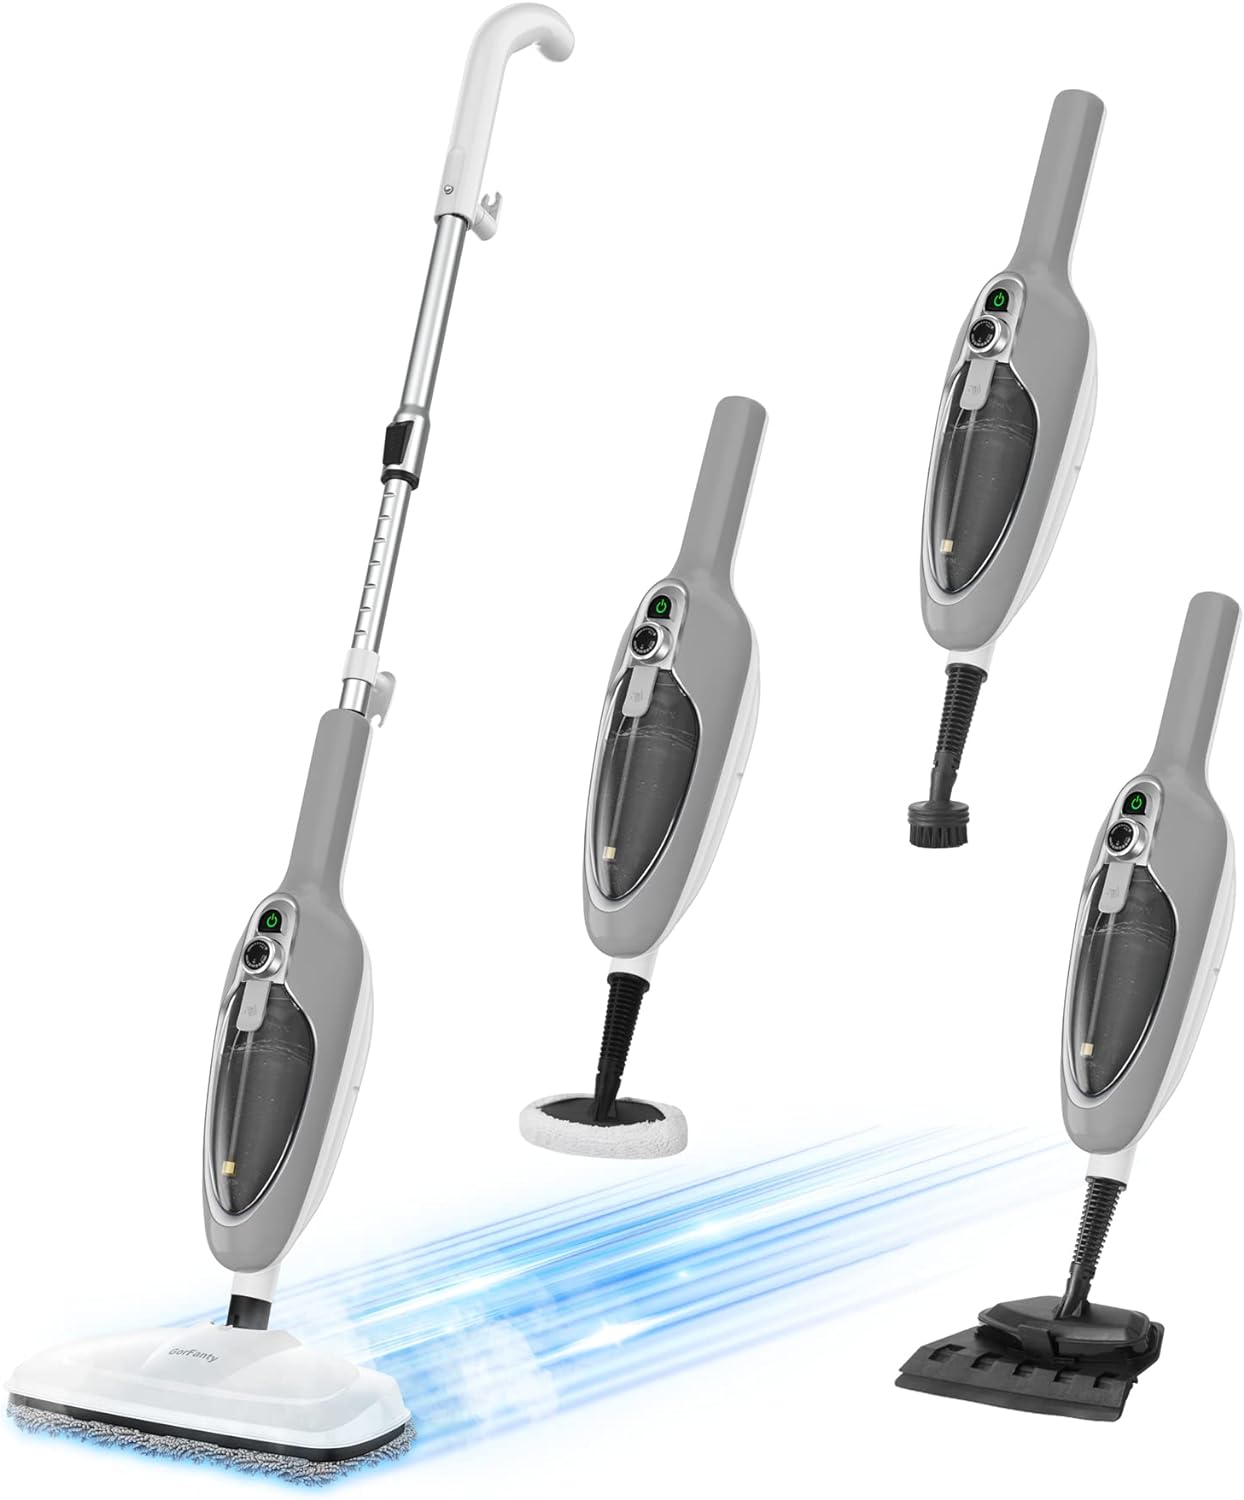 Steam Mop - 10-in-1 MultiPurpose Handheld Steam Cleaner Detachable Floor Steamer for Hardwood/Tile/Laminate Floors Carpet with 11 Accessories for Whole Home Use.